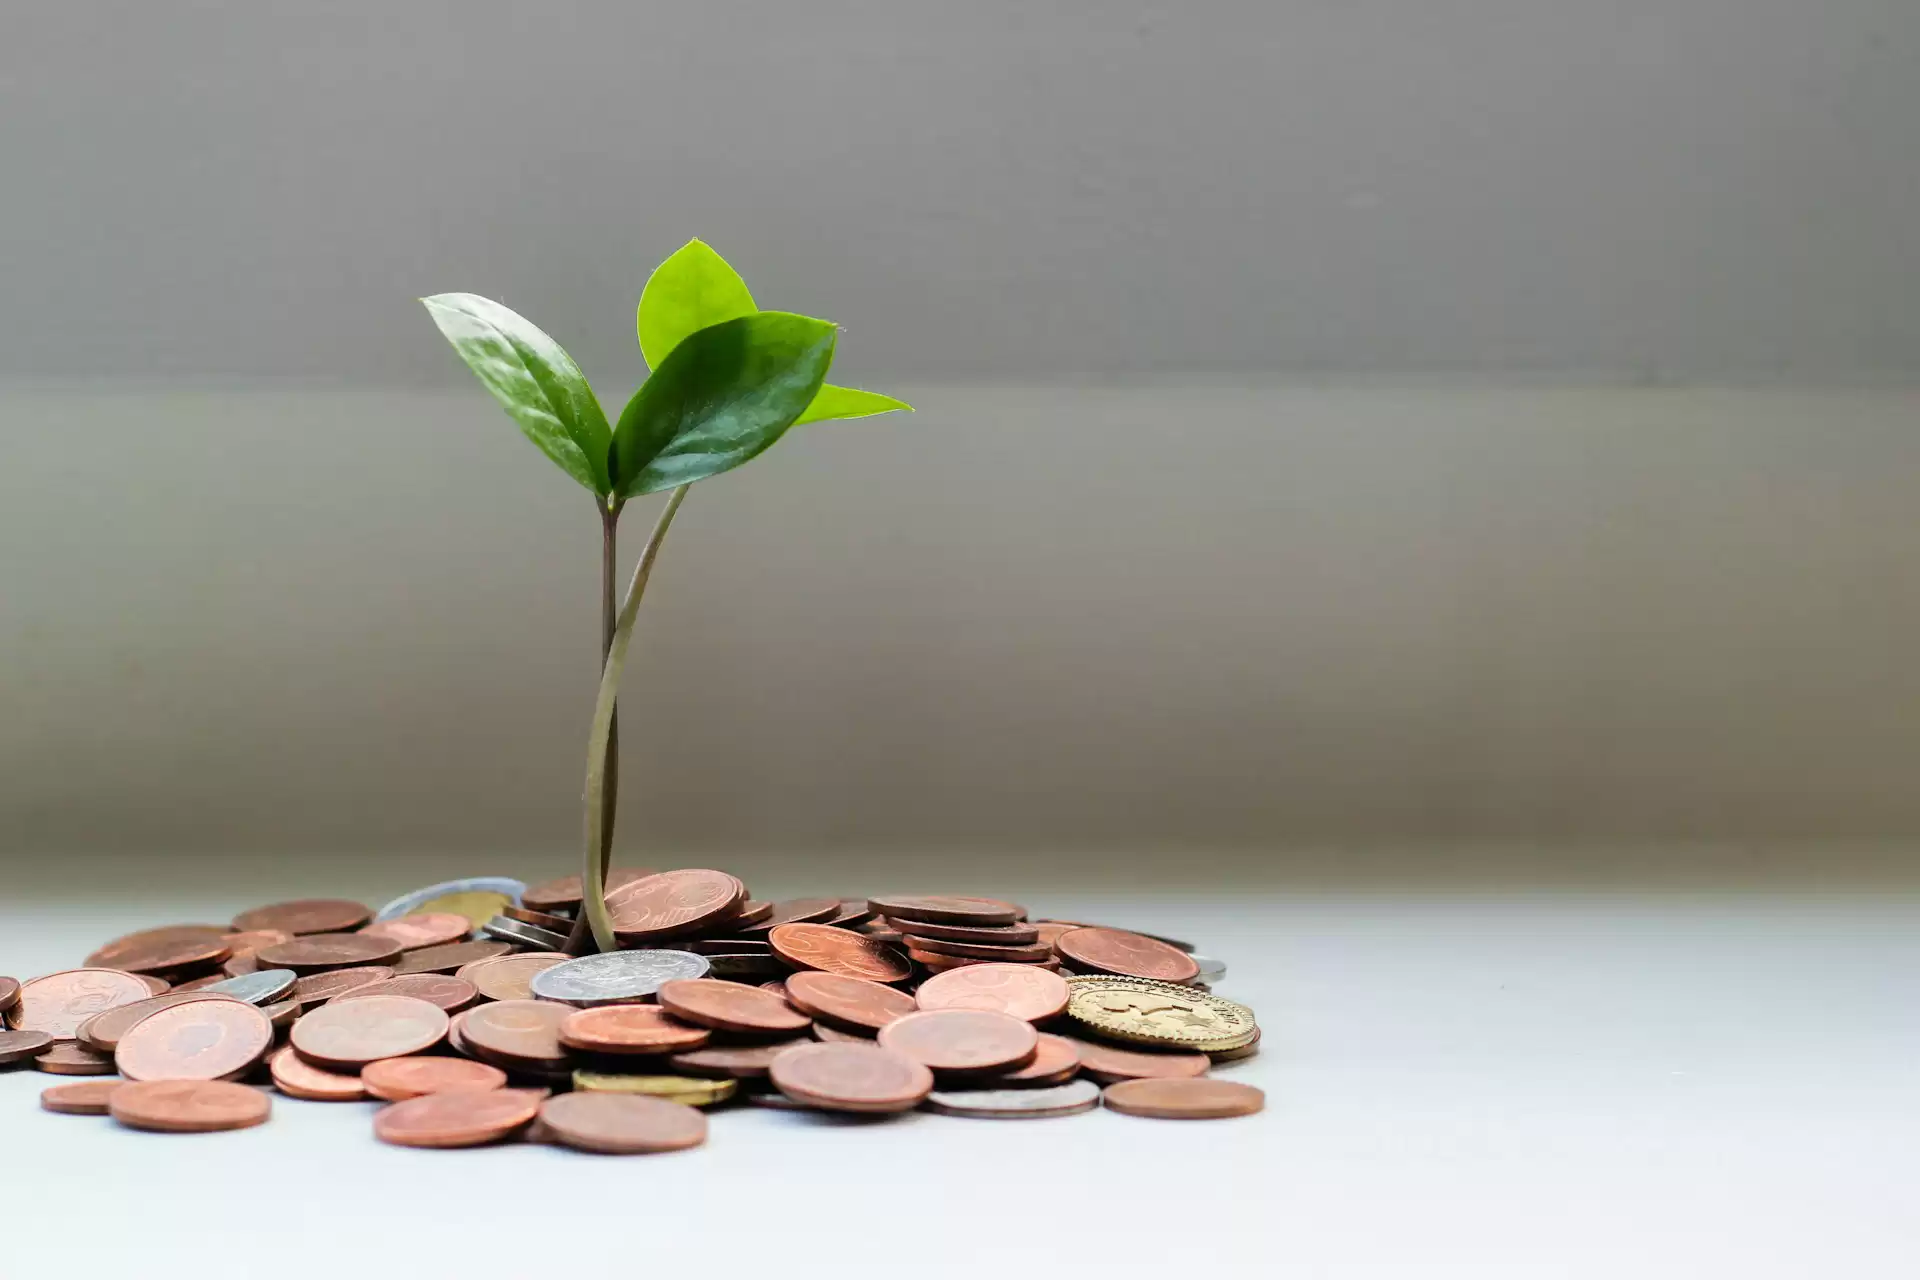 A green sprout growing from a pile of coins